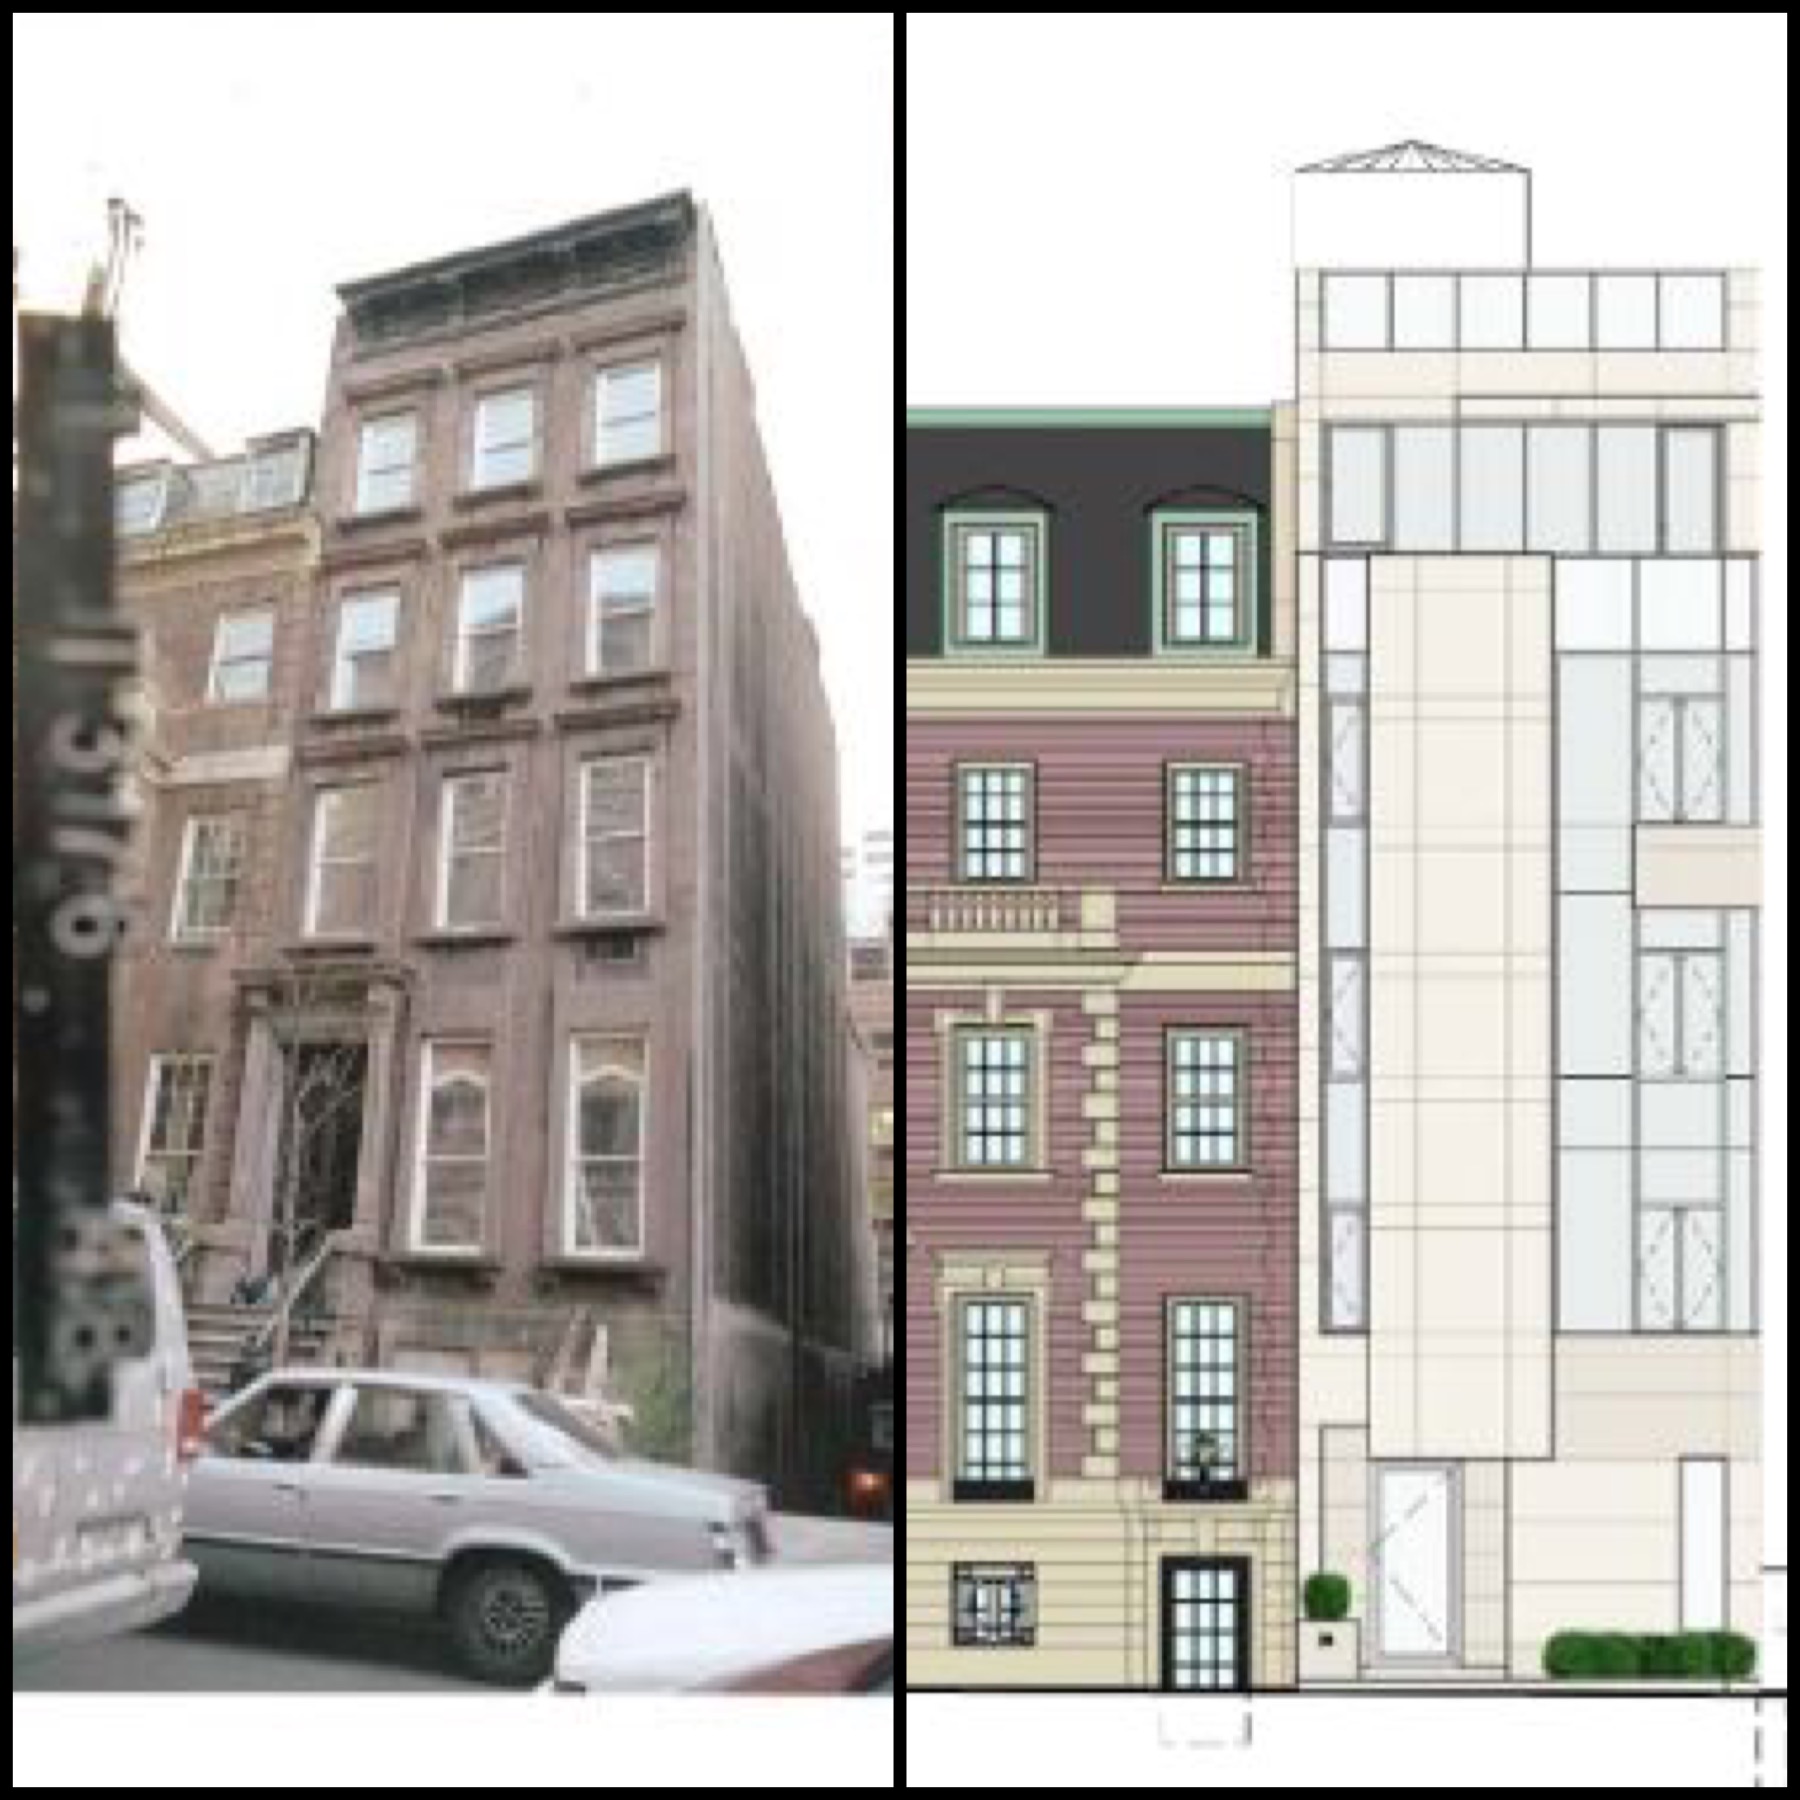 34 East 62nd Street-original and prev approved side by side